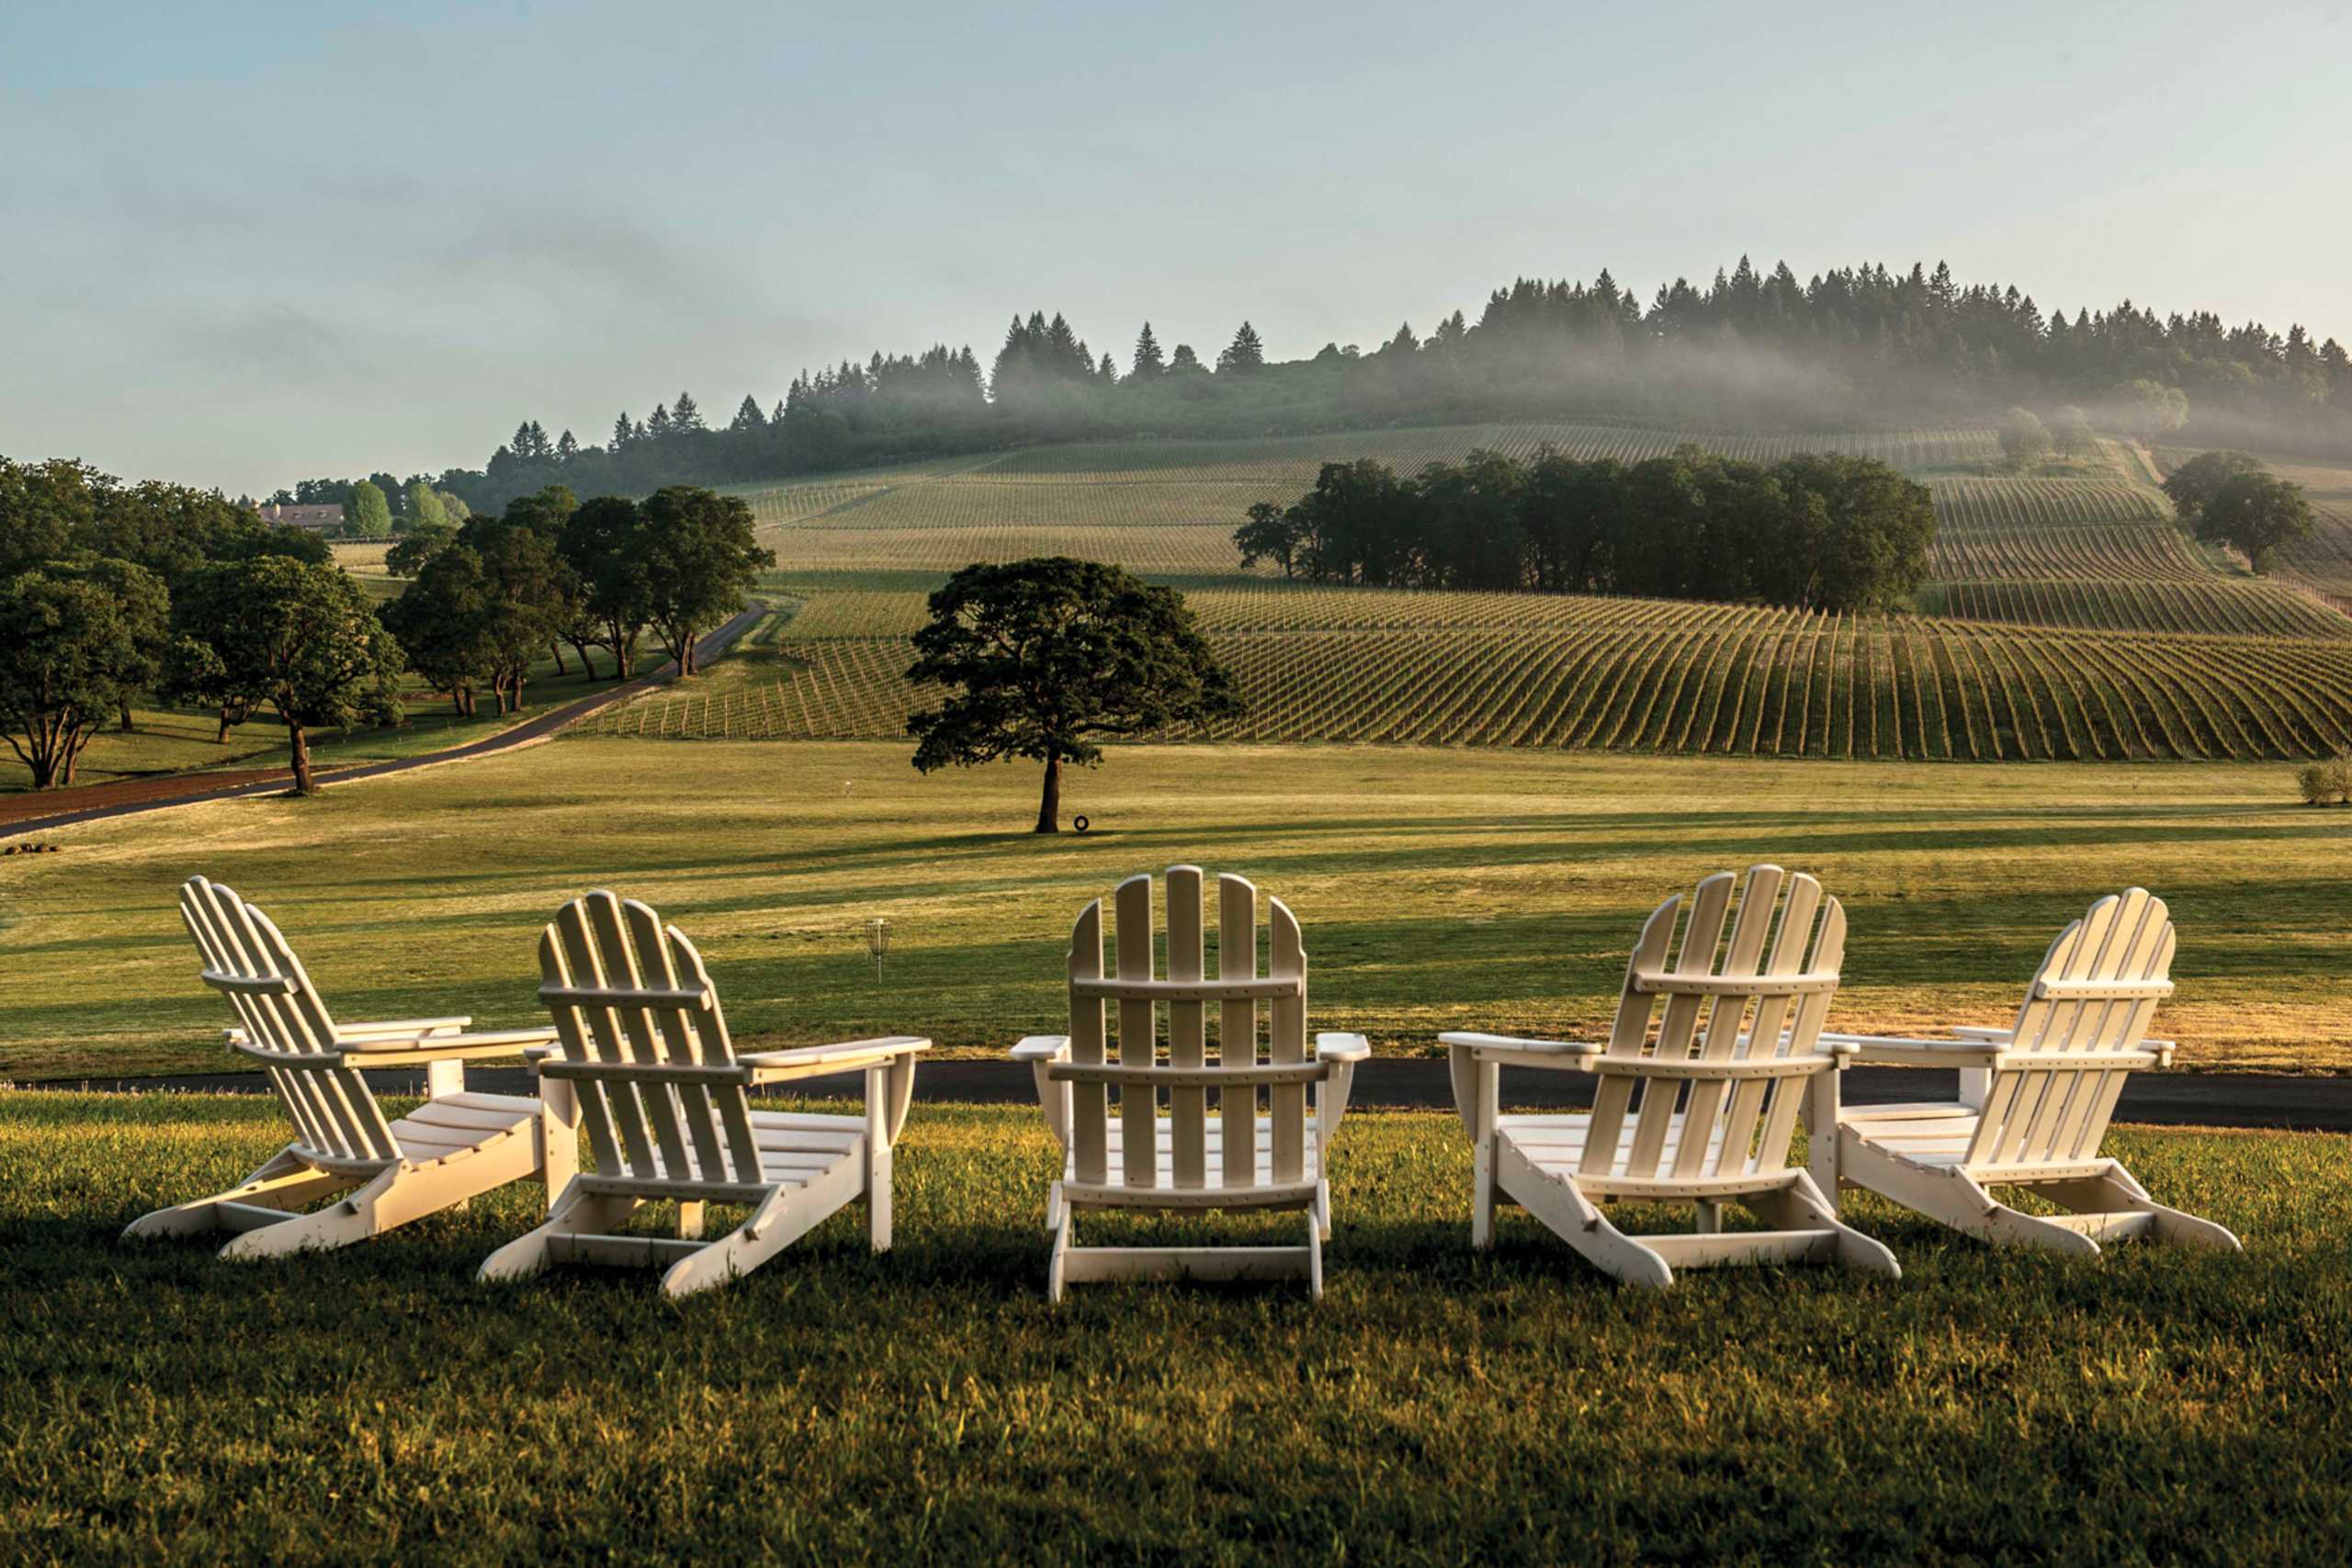 Beautiful Willamette Valley, home to some 500 wineries